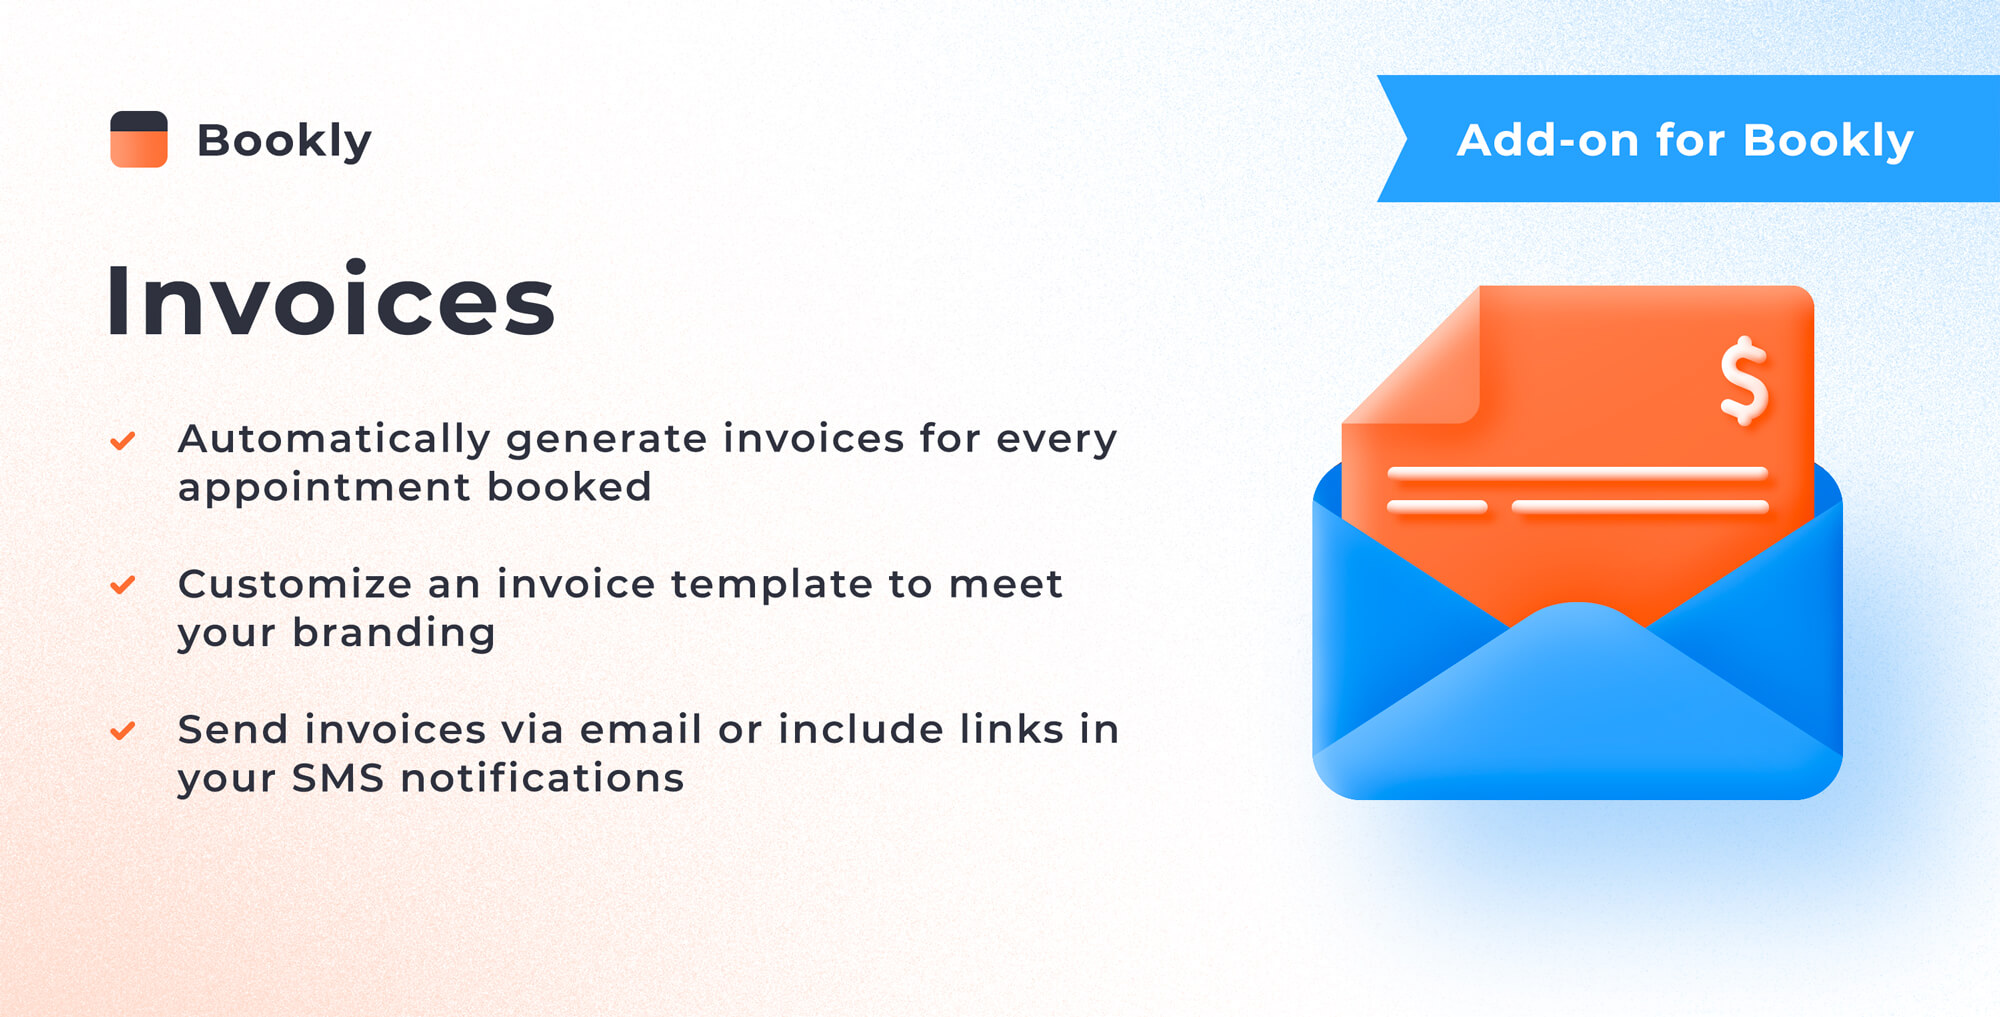 Bookly Invoices (Add-on)